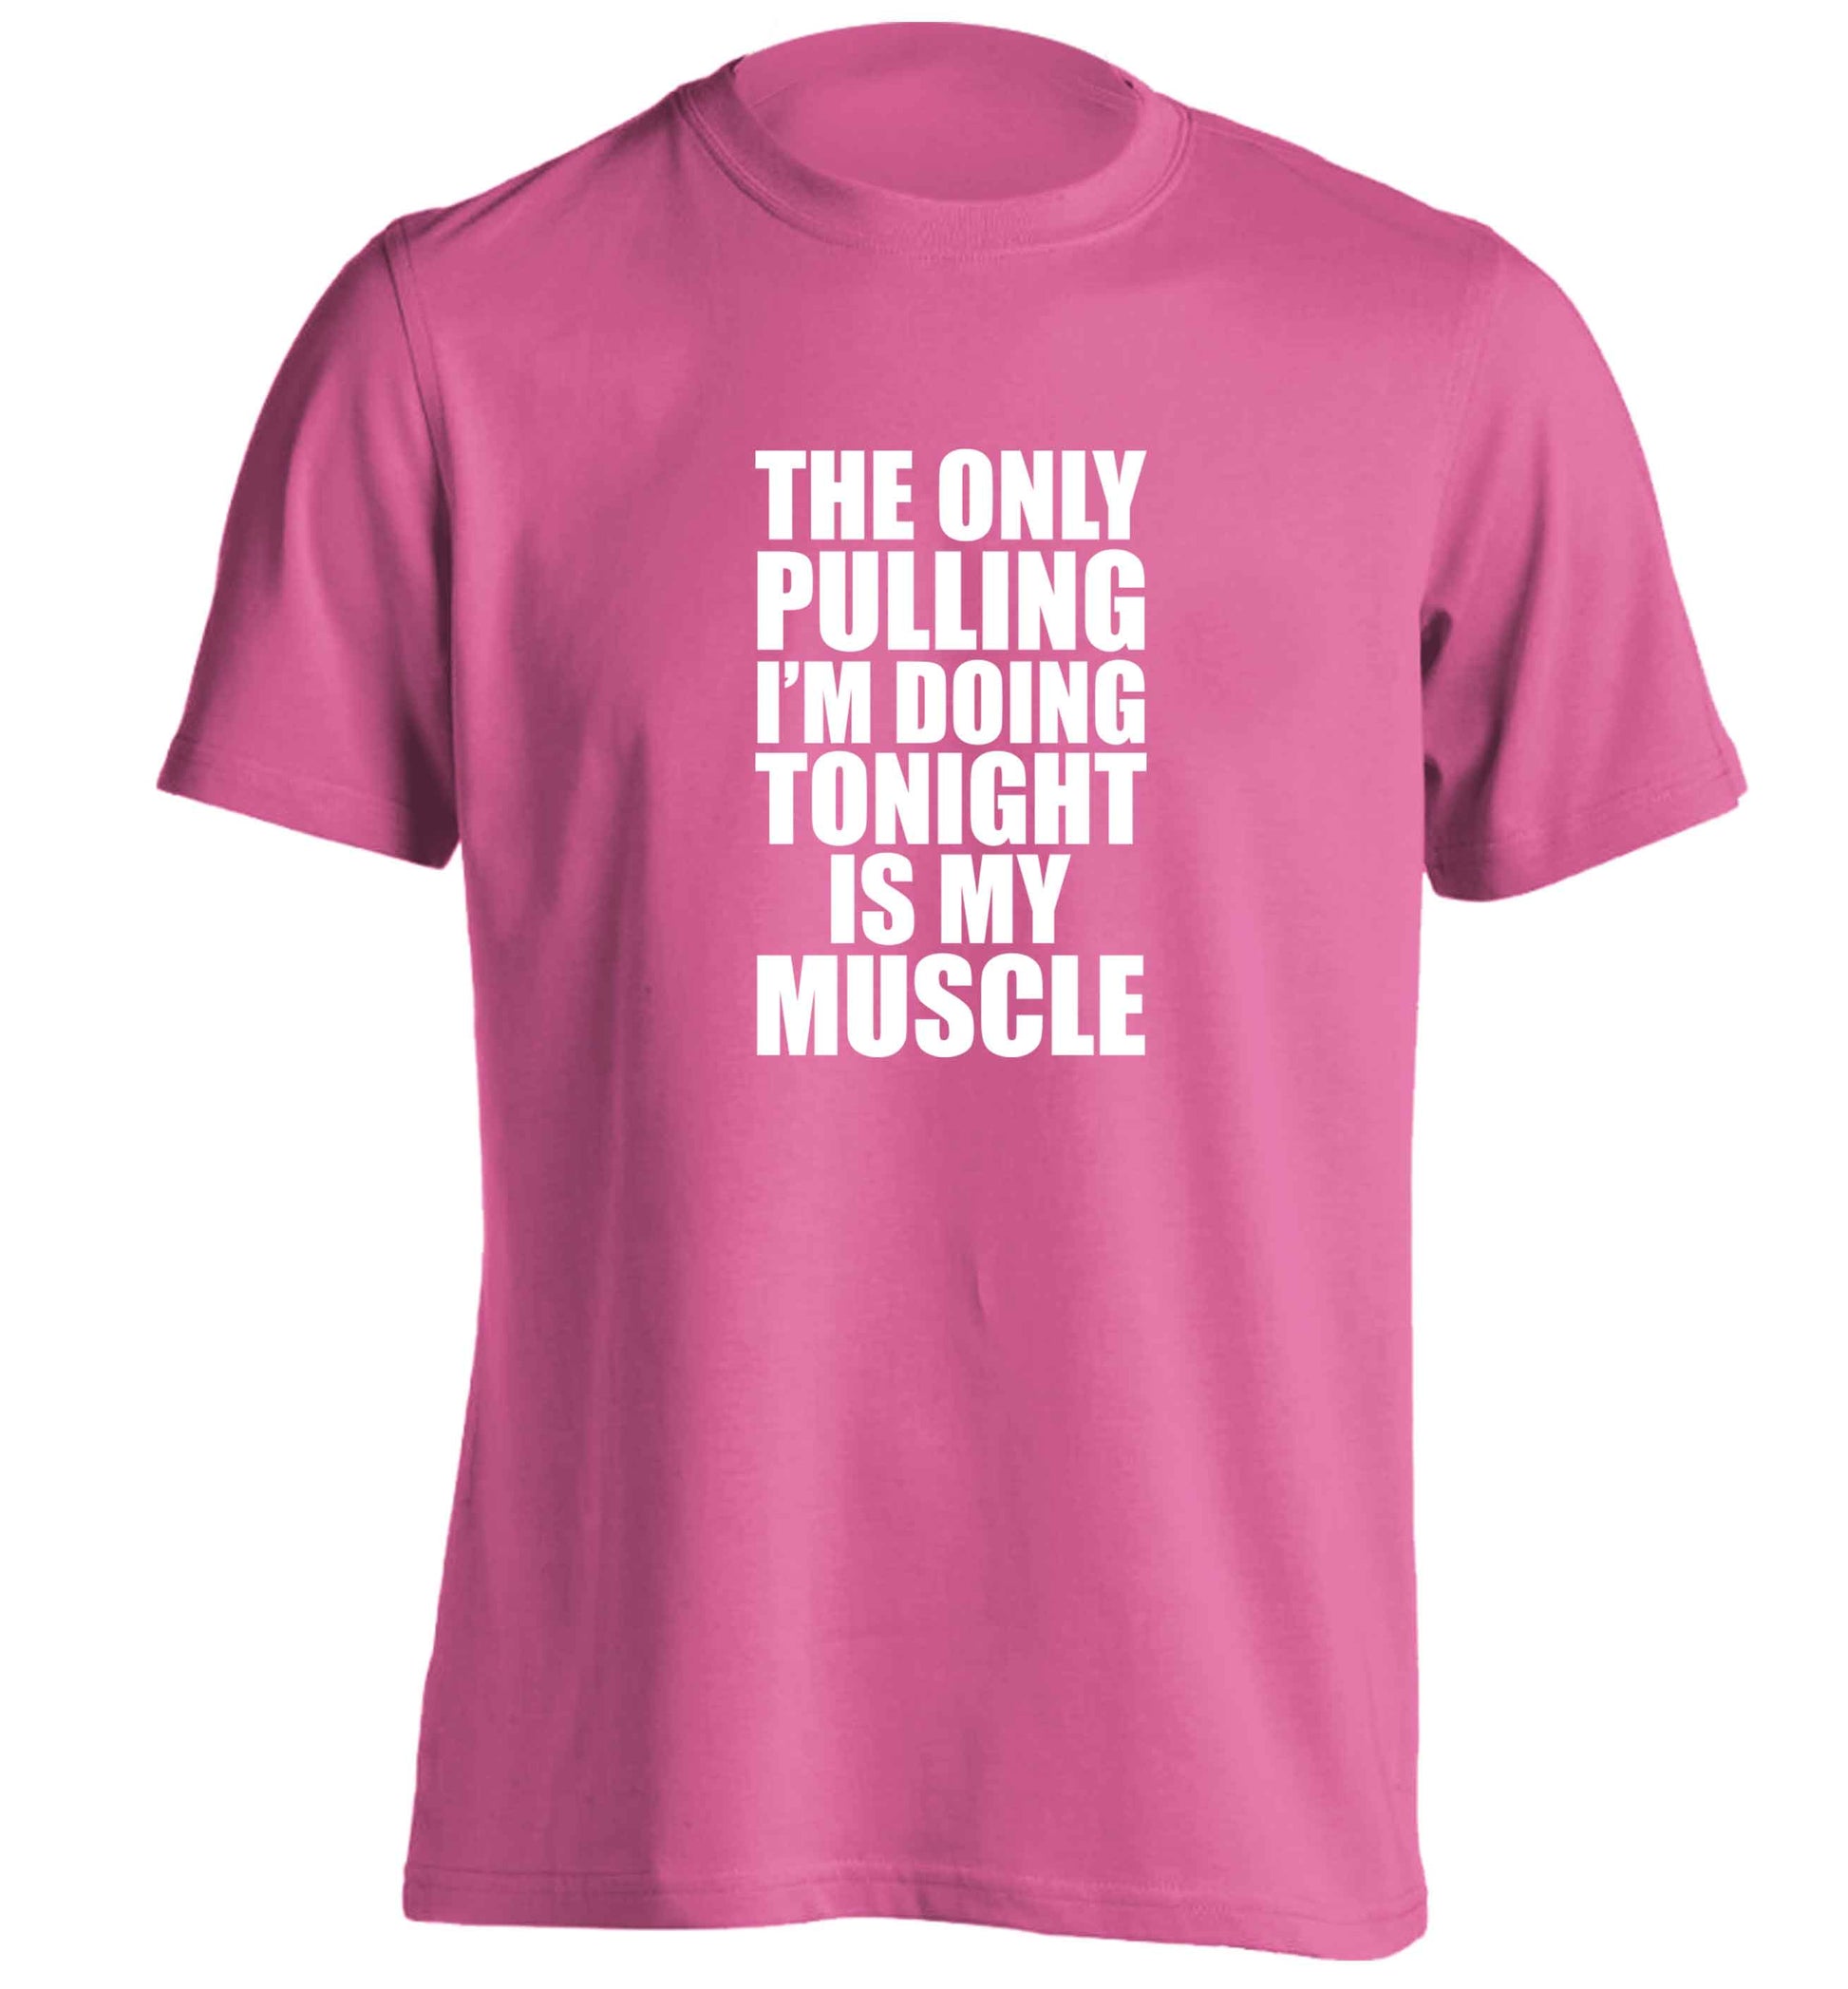 The only pulling I'm doing tonight is my muscle adults unisex pink Tshirt 2XL